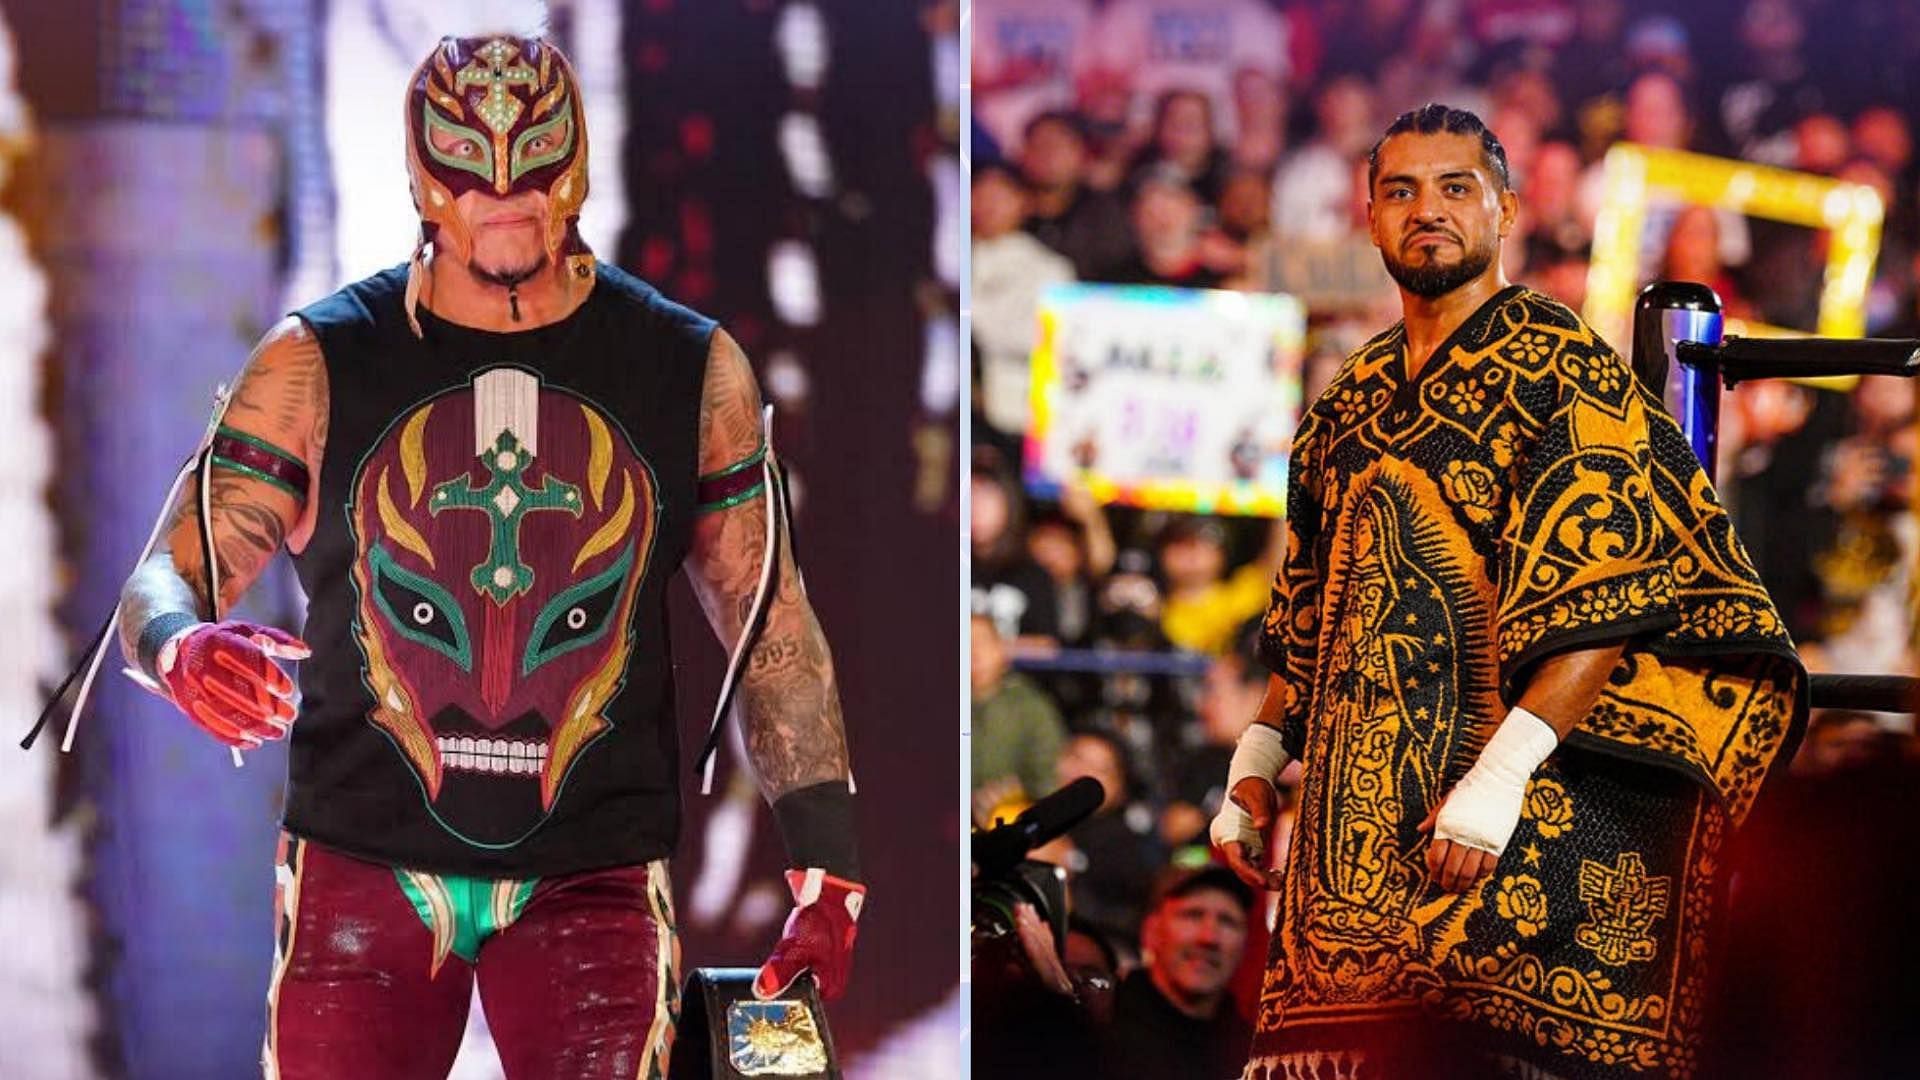 Rey Mysterio returned to WWE television on SmackDown